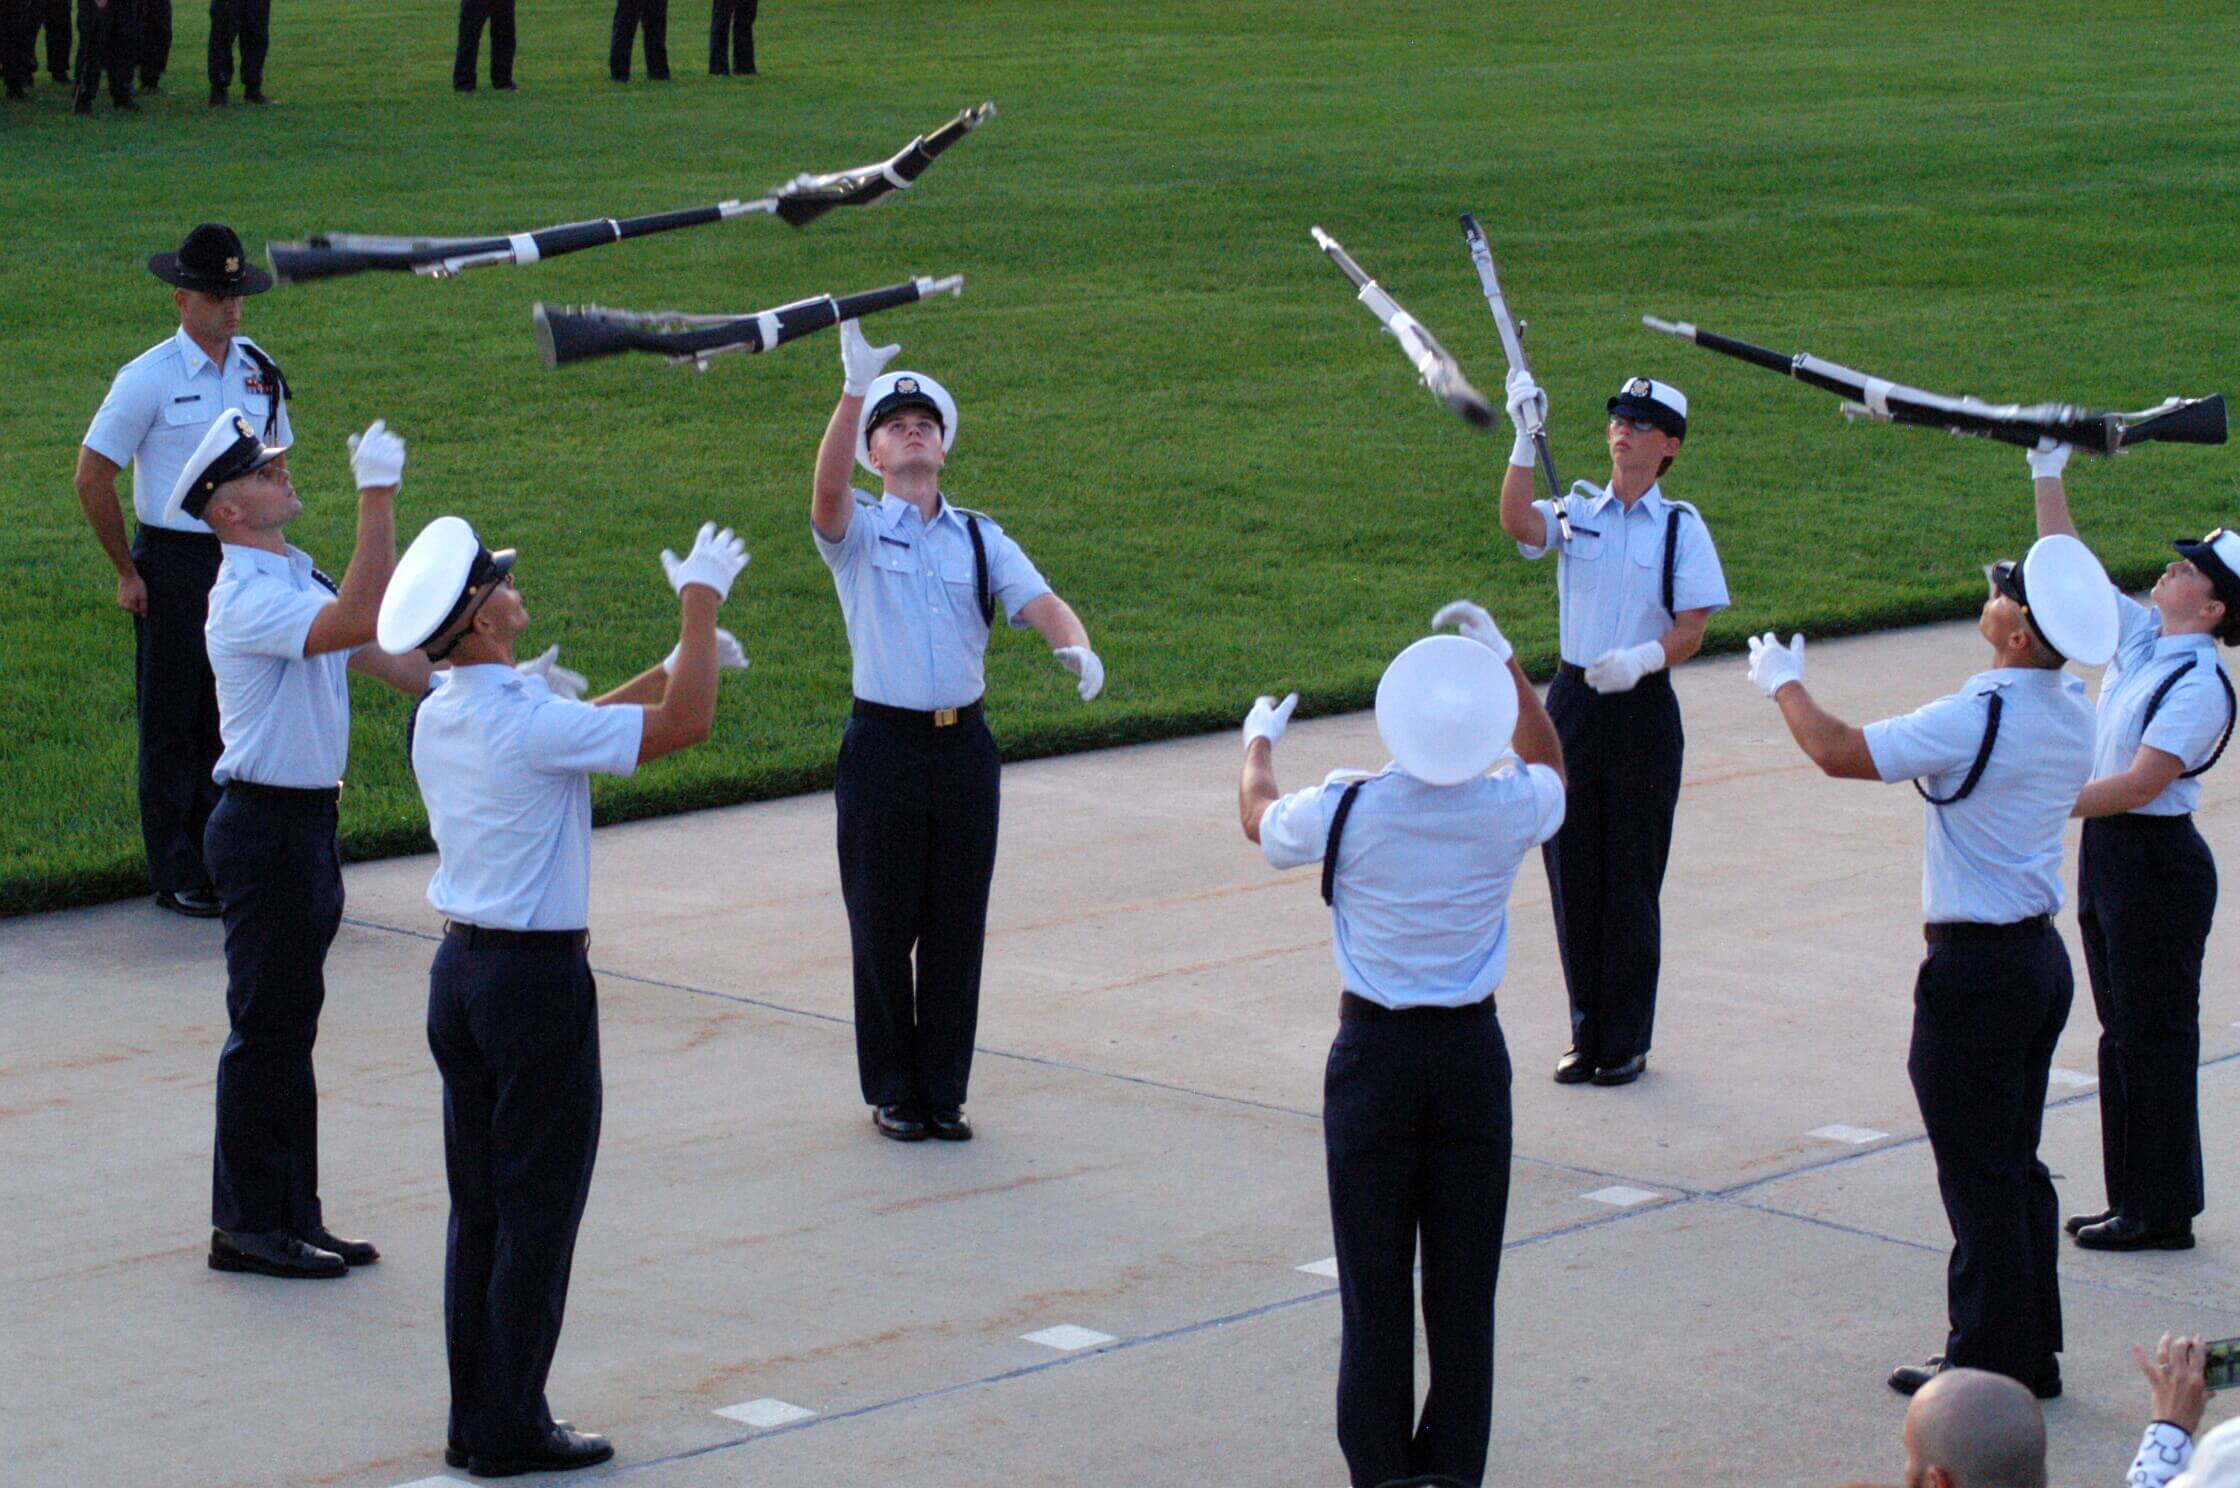 Silent drill team of recruits performs at Sunset Parade Sept. 1